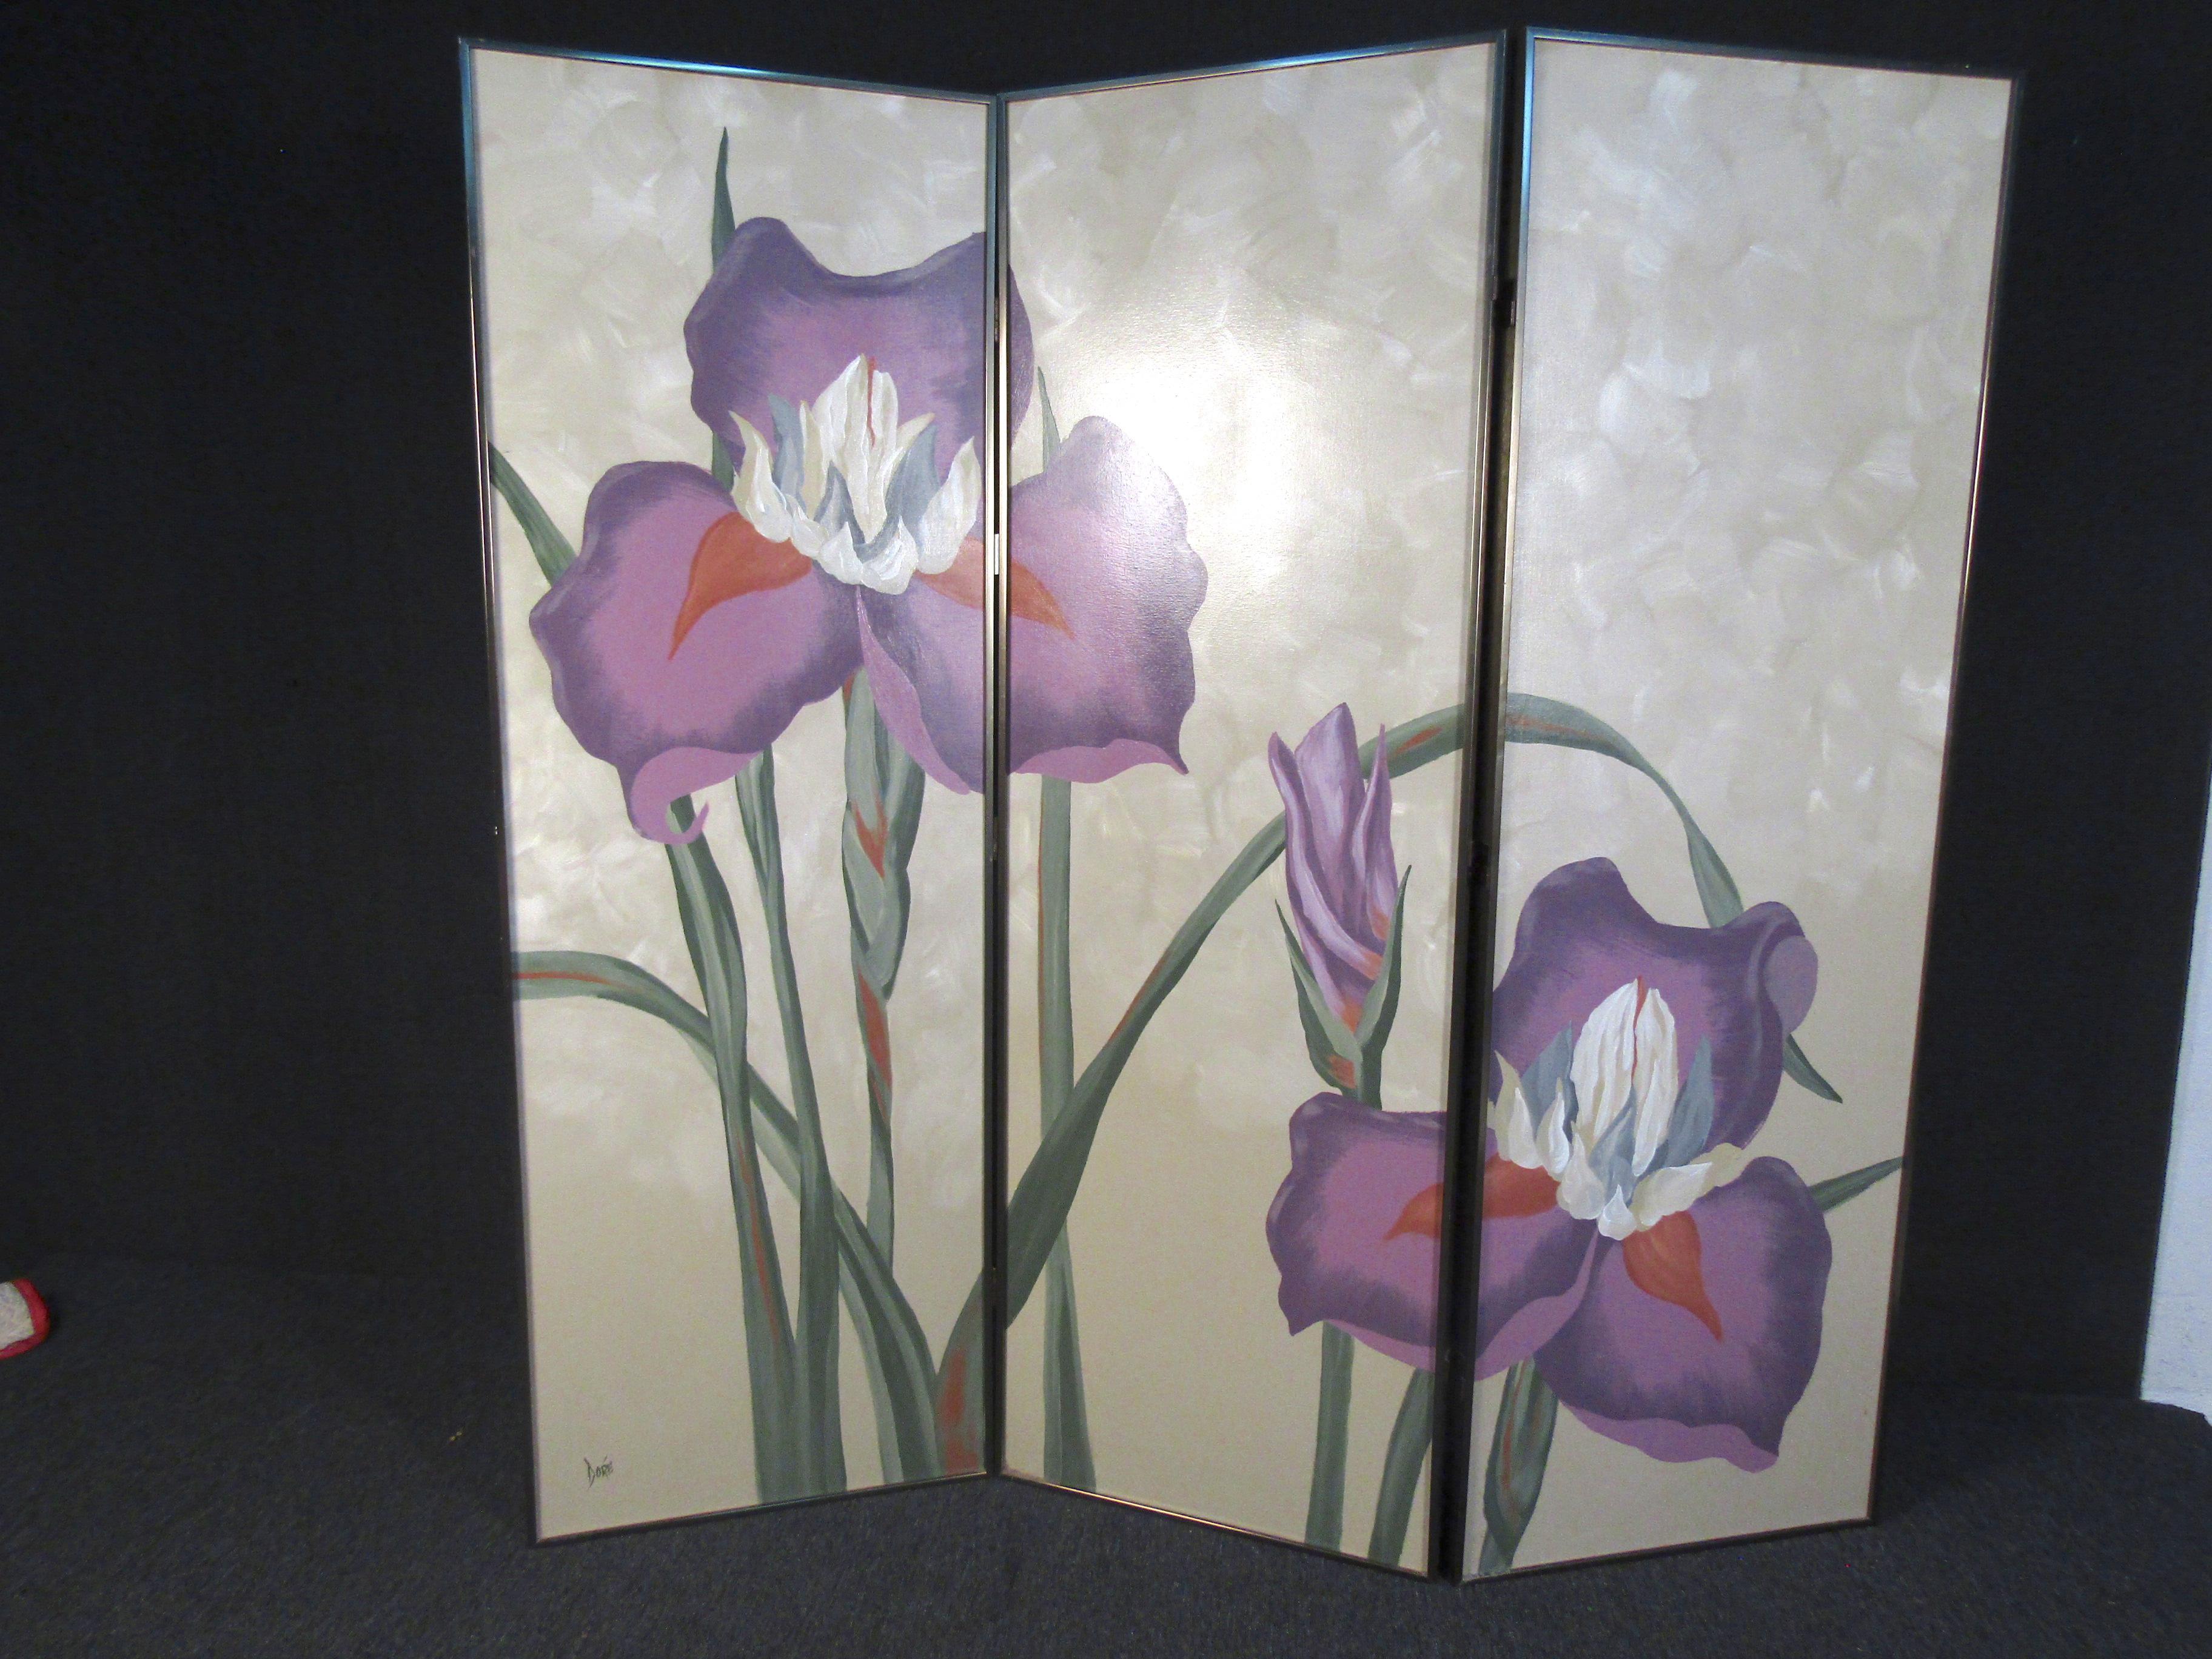 With a hand-painted flower design and rich colors, this vintage room divider is a great way to add a unique personal touch to any room. Please confirm item location with seller (NY/NJ).